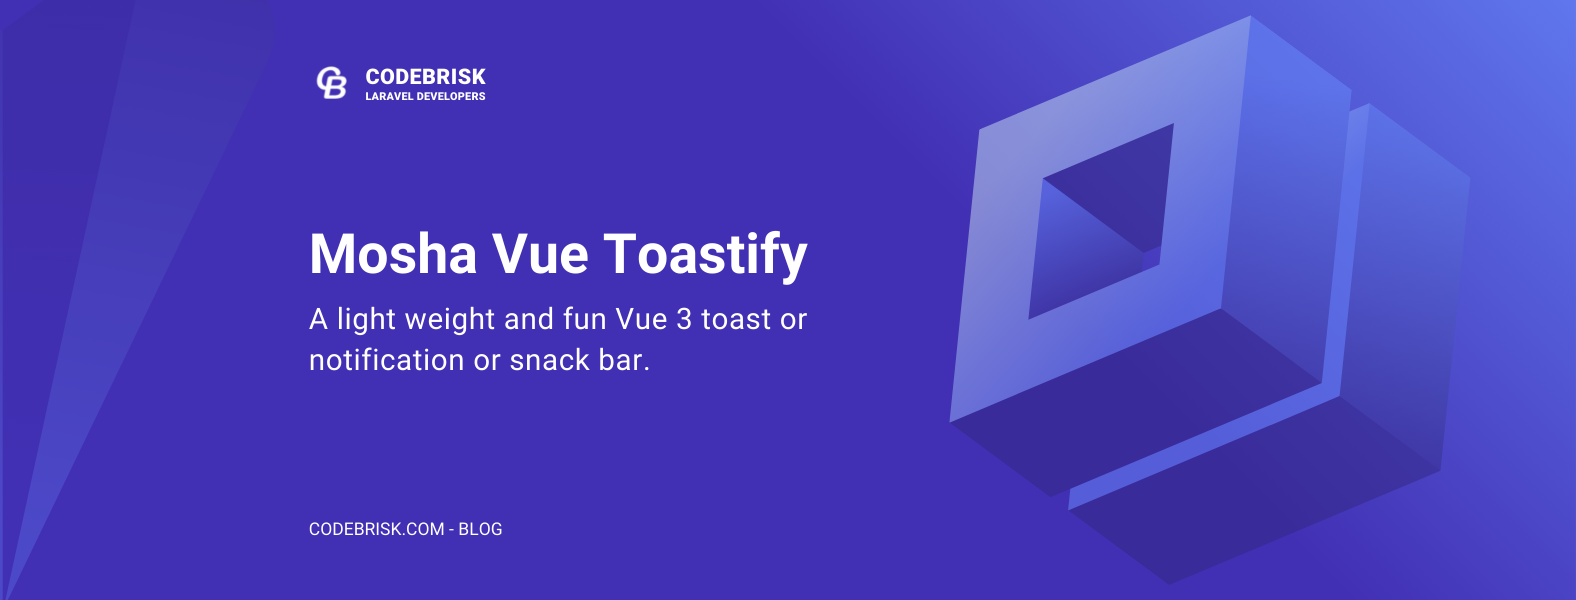 Mosha Vue Toastify - A Vue 3 toast or Notification Library